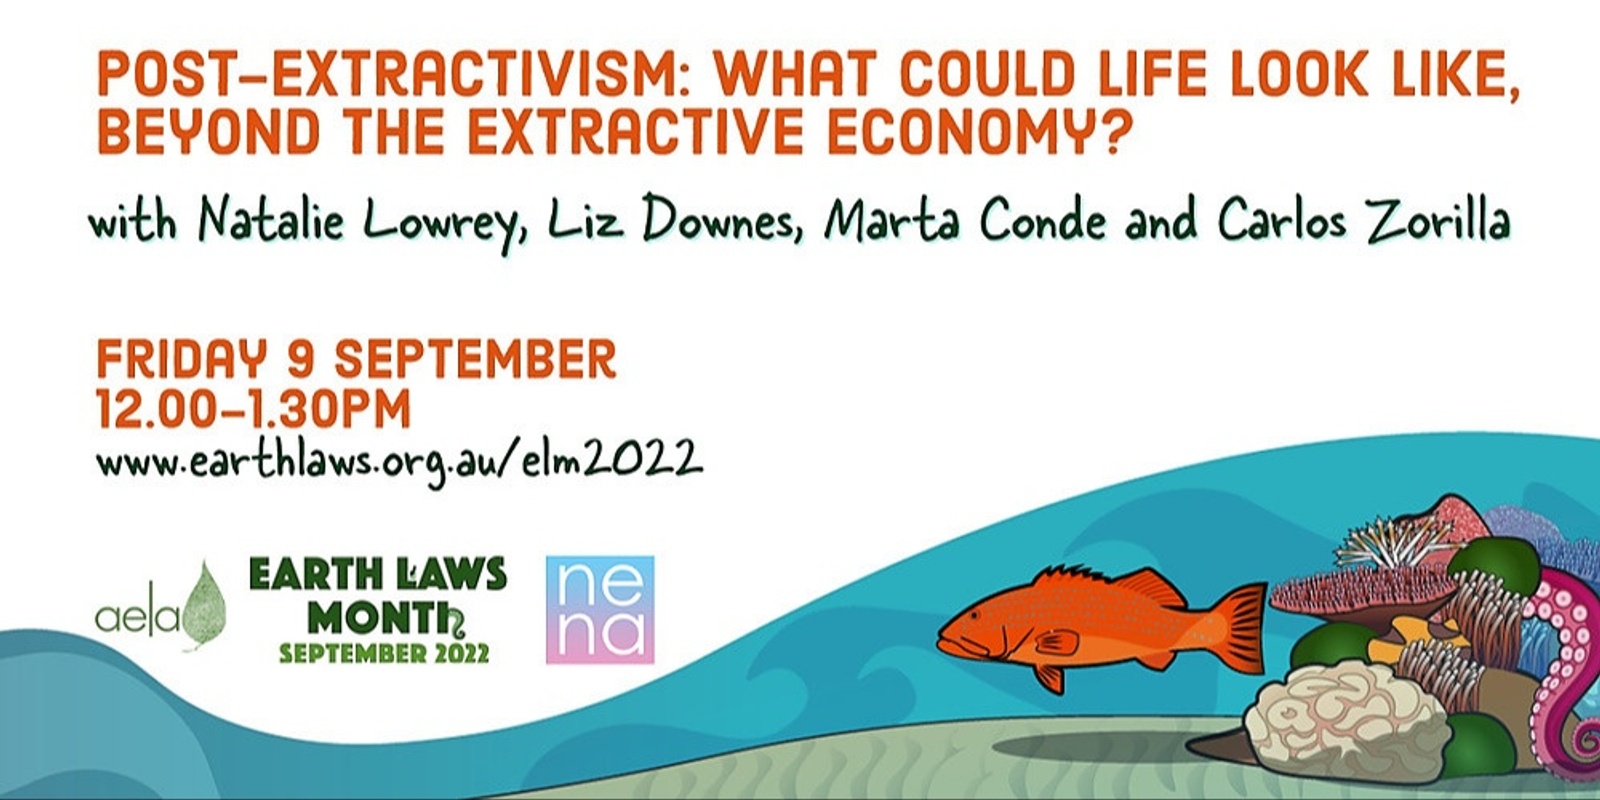 Post-Extractivism: What could life look like beyond the Extractive Economy? with Natalie Lowrey, Liz Downes, Marta Conde and Carlos Zorrilla